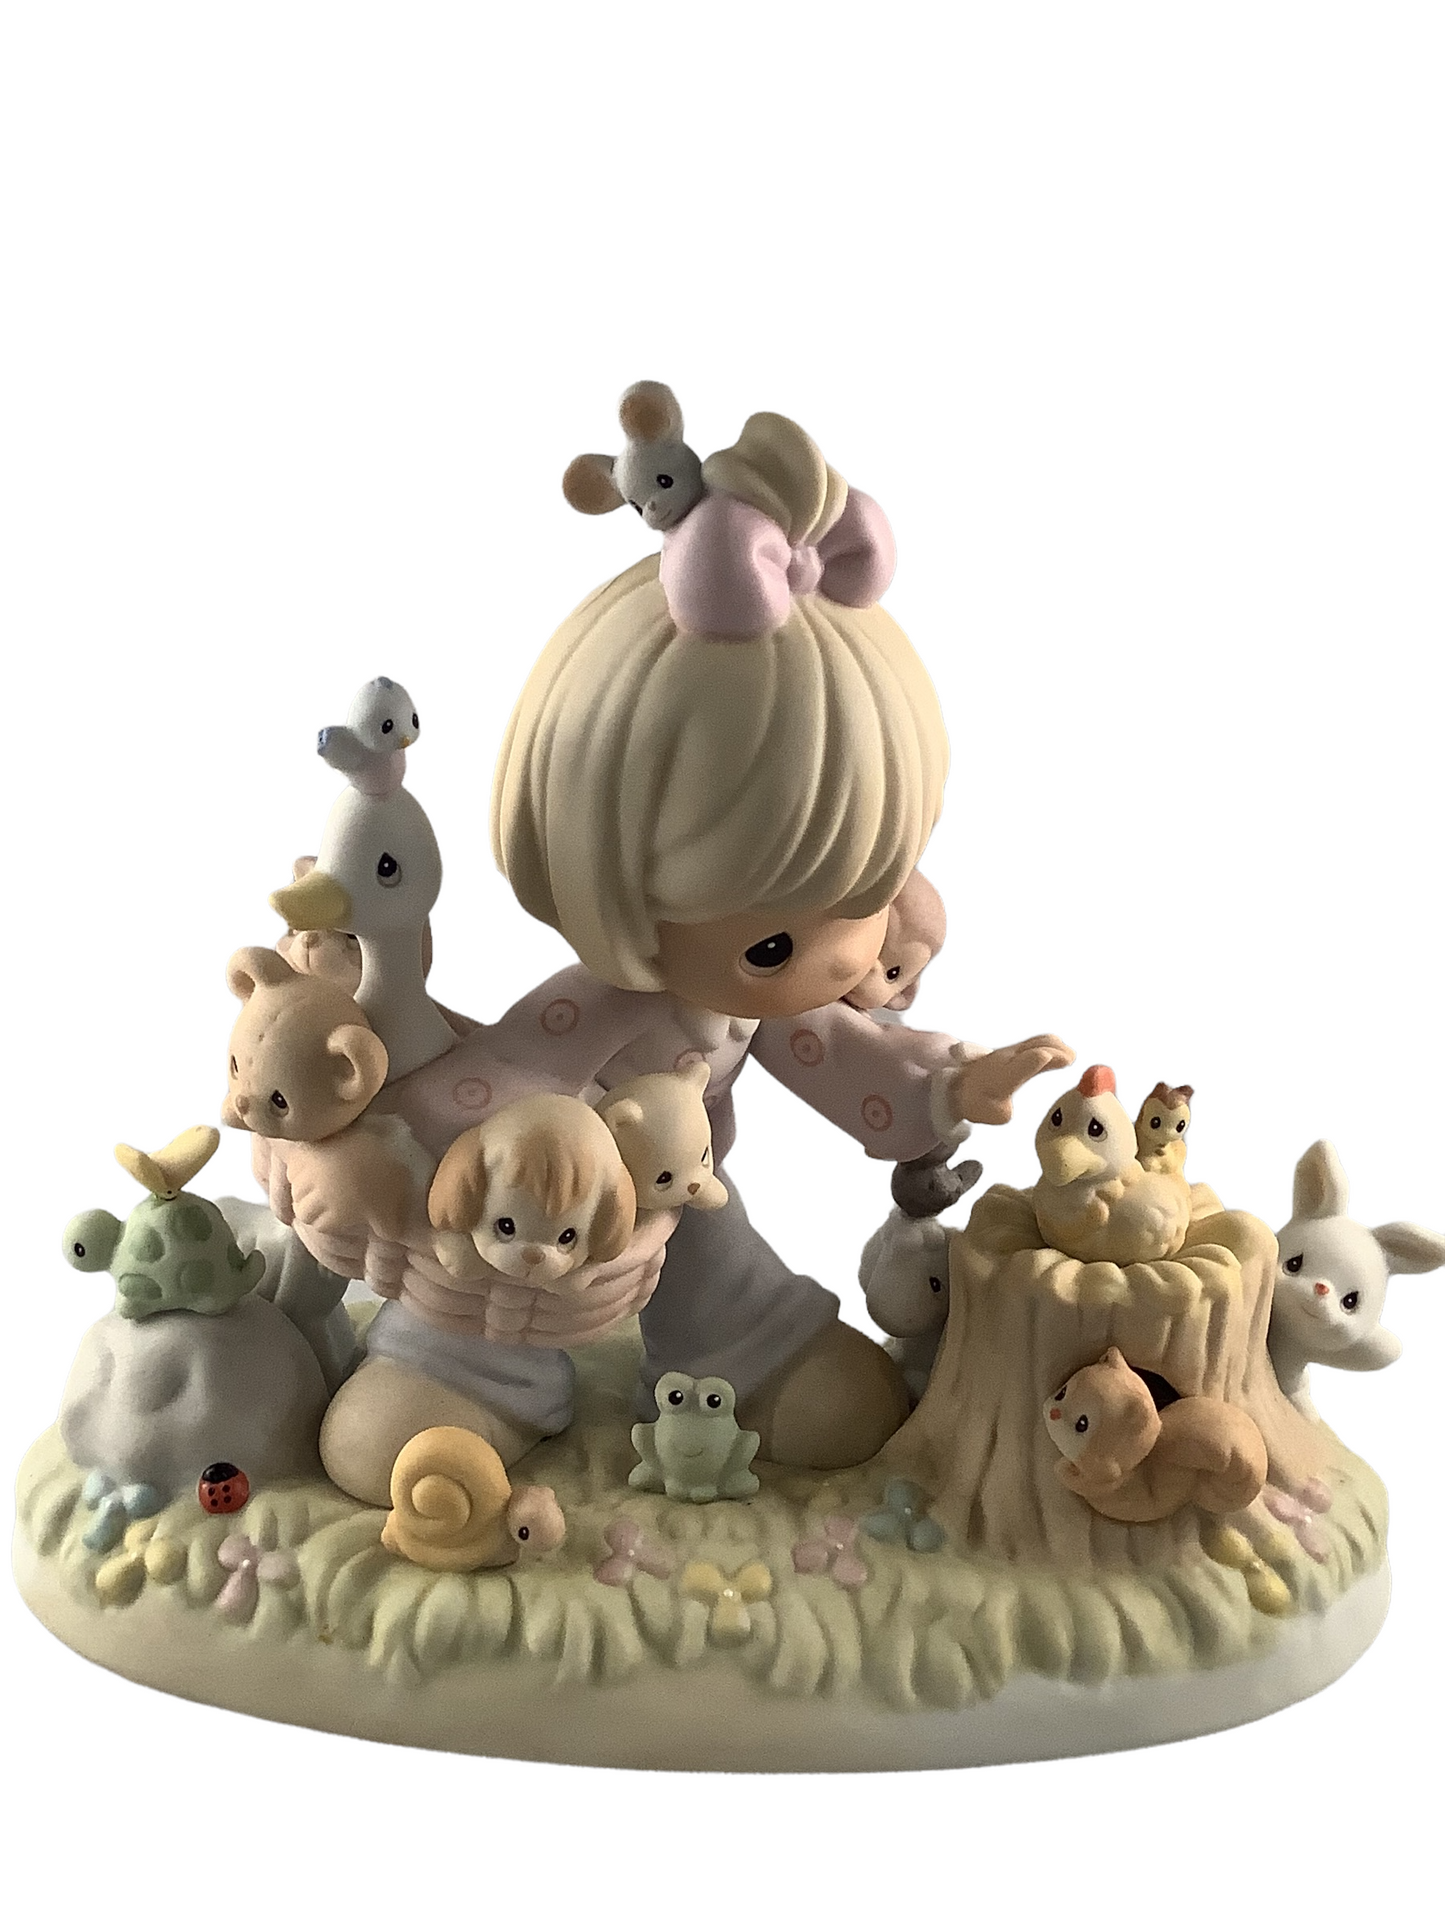 Collecting Friends Along The Way - Precious Moment Figurine